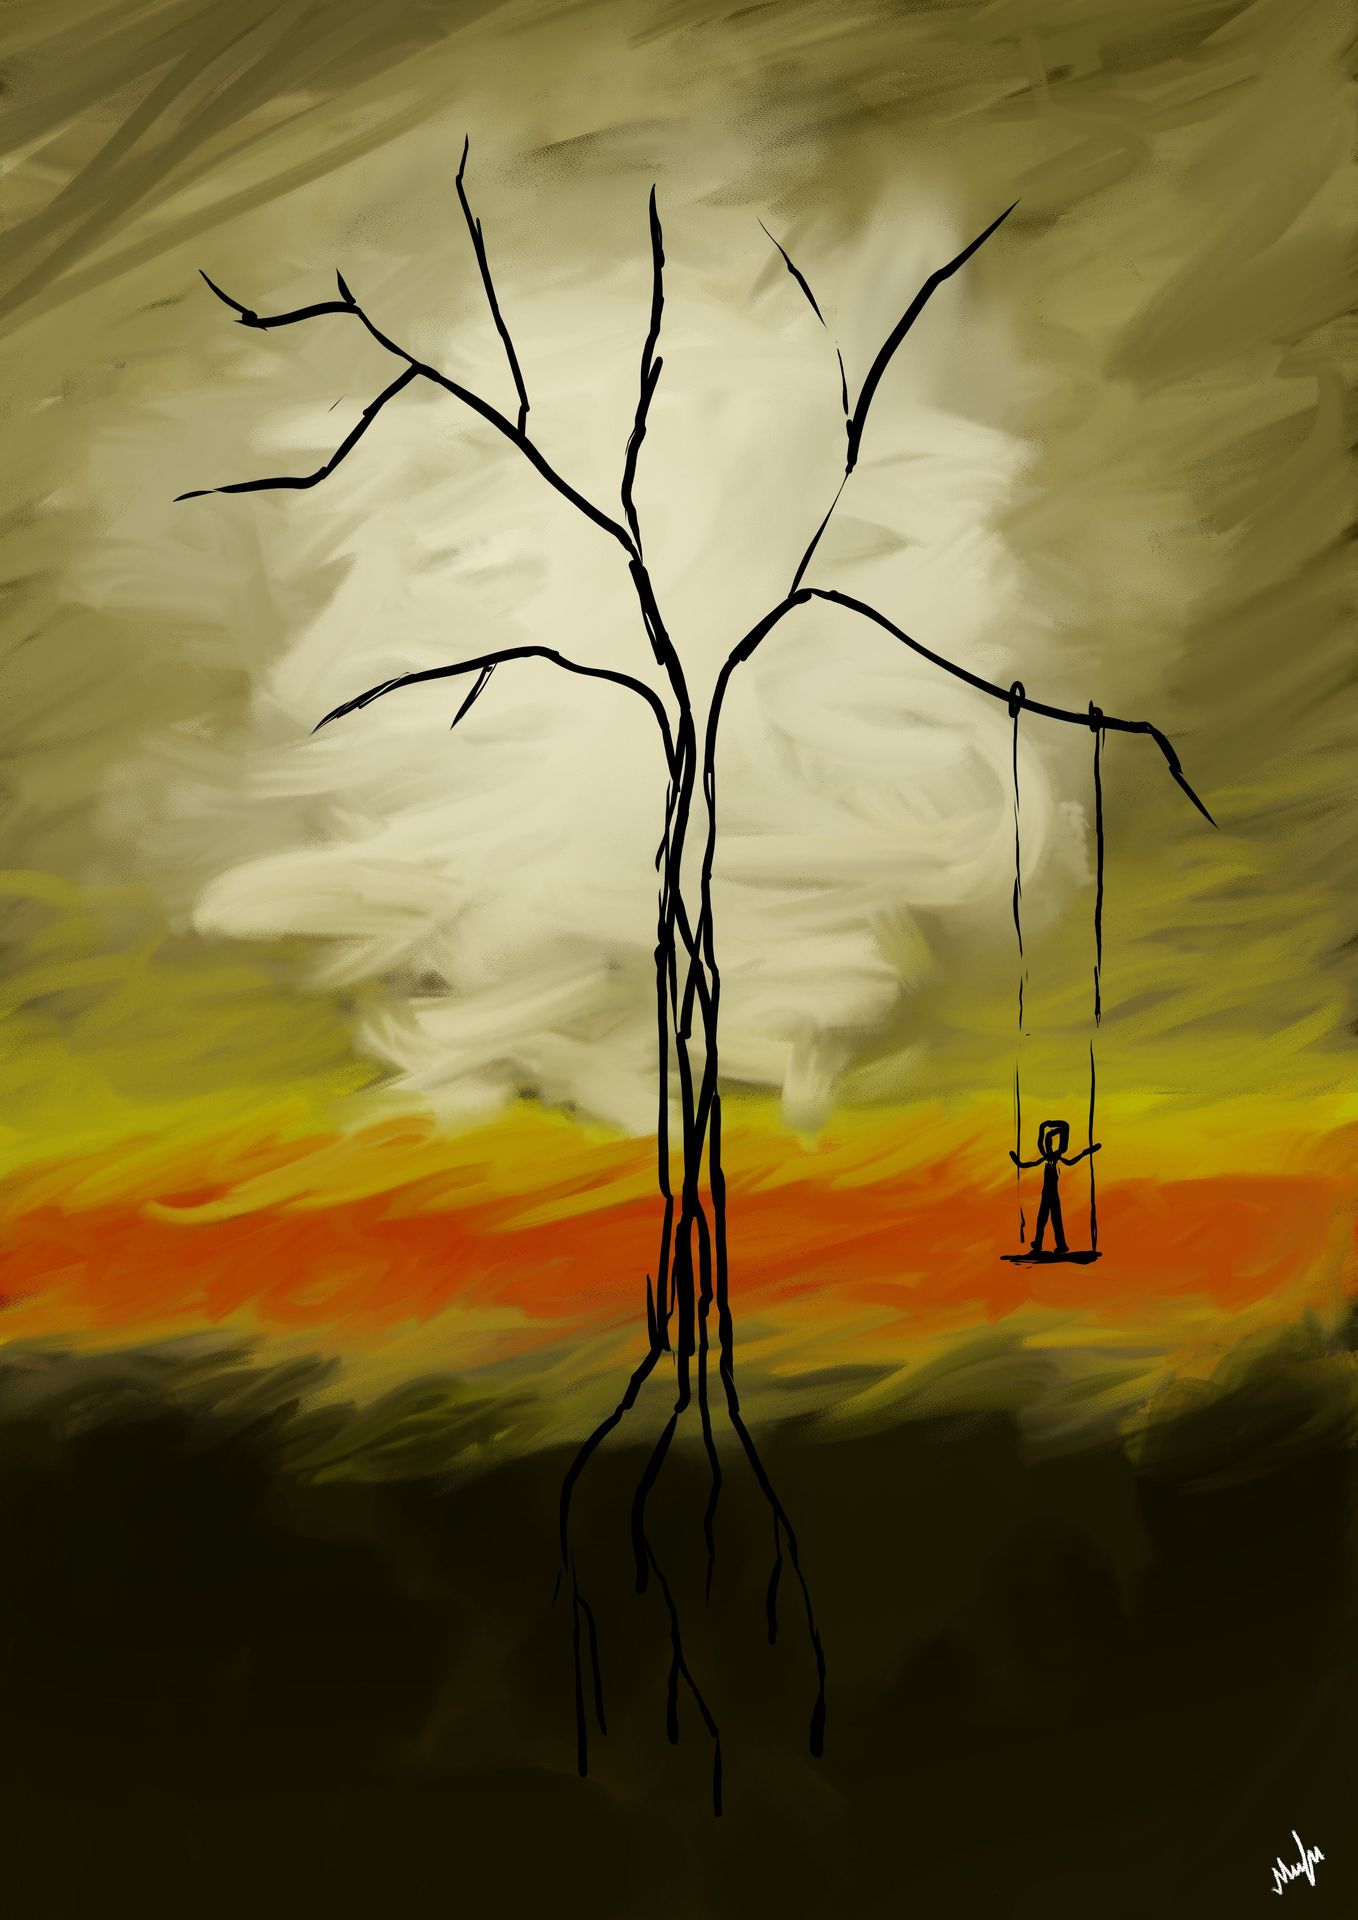 Swinging Dream and Old Tree